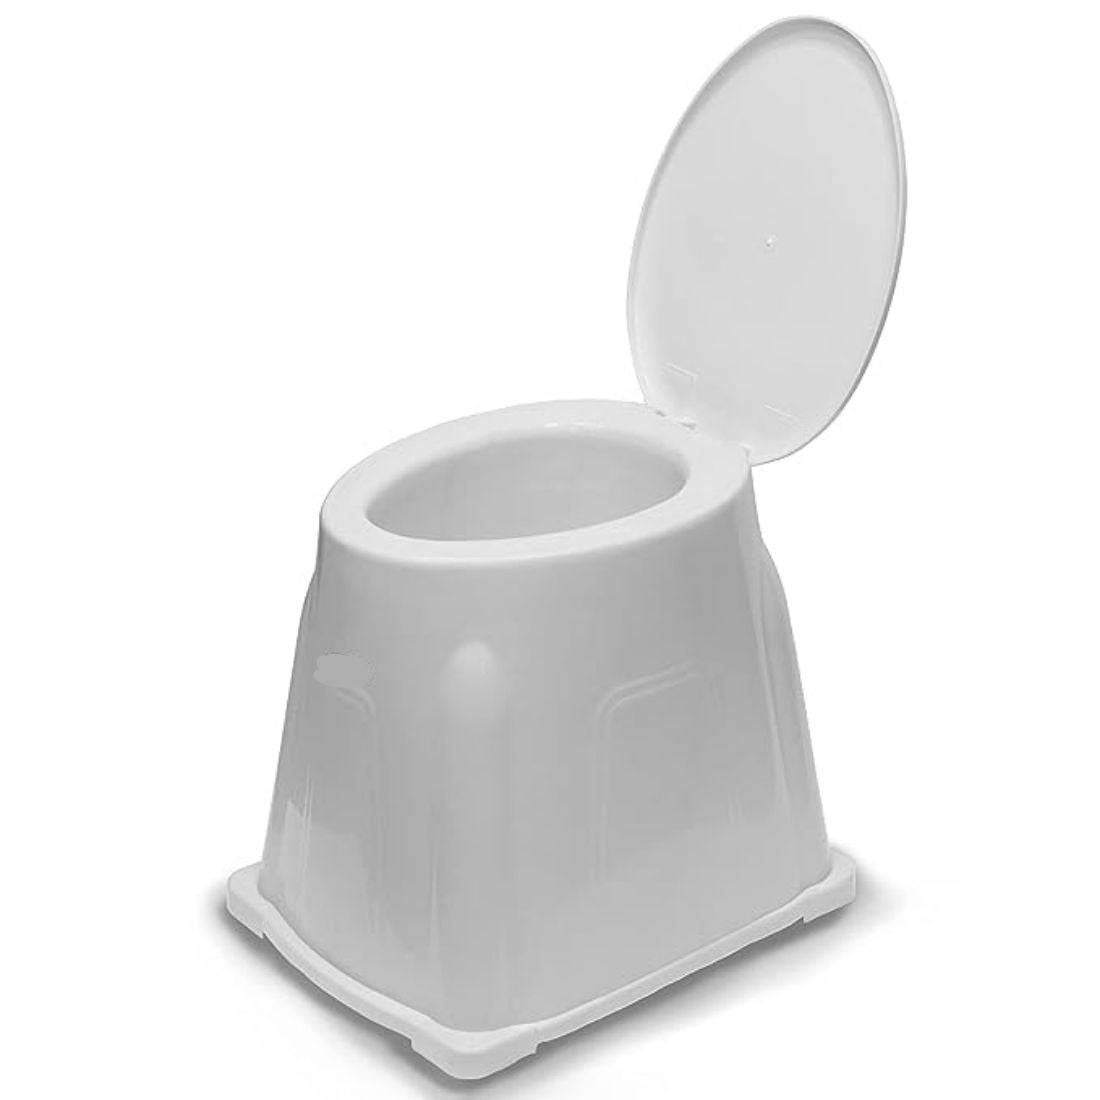 Portable Indian to Western Commode Converter - Commode Stool for Indian Toilet